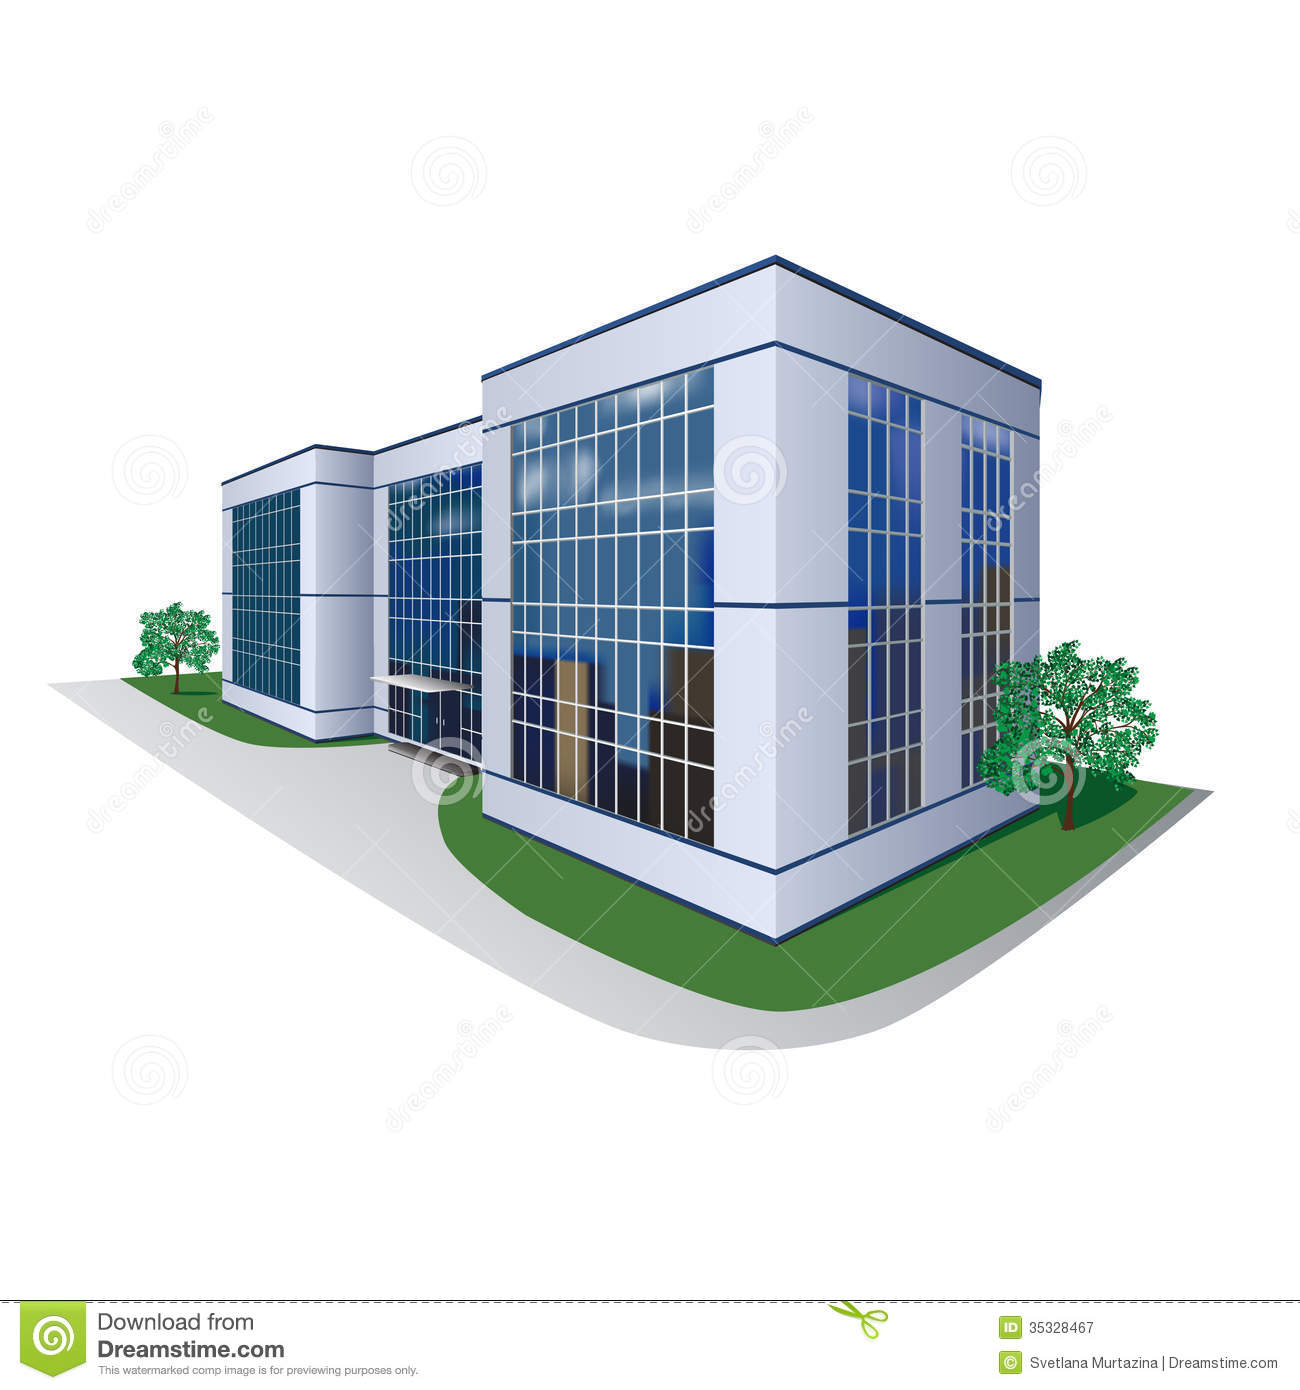 Building Of The Shopping Center Office Royalty Free Stock Photography